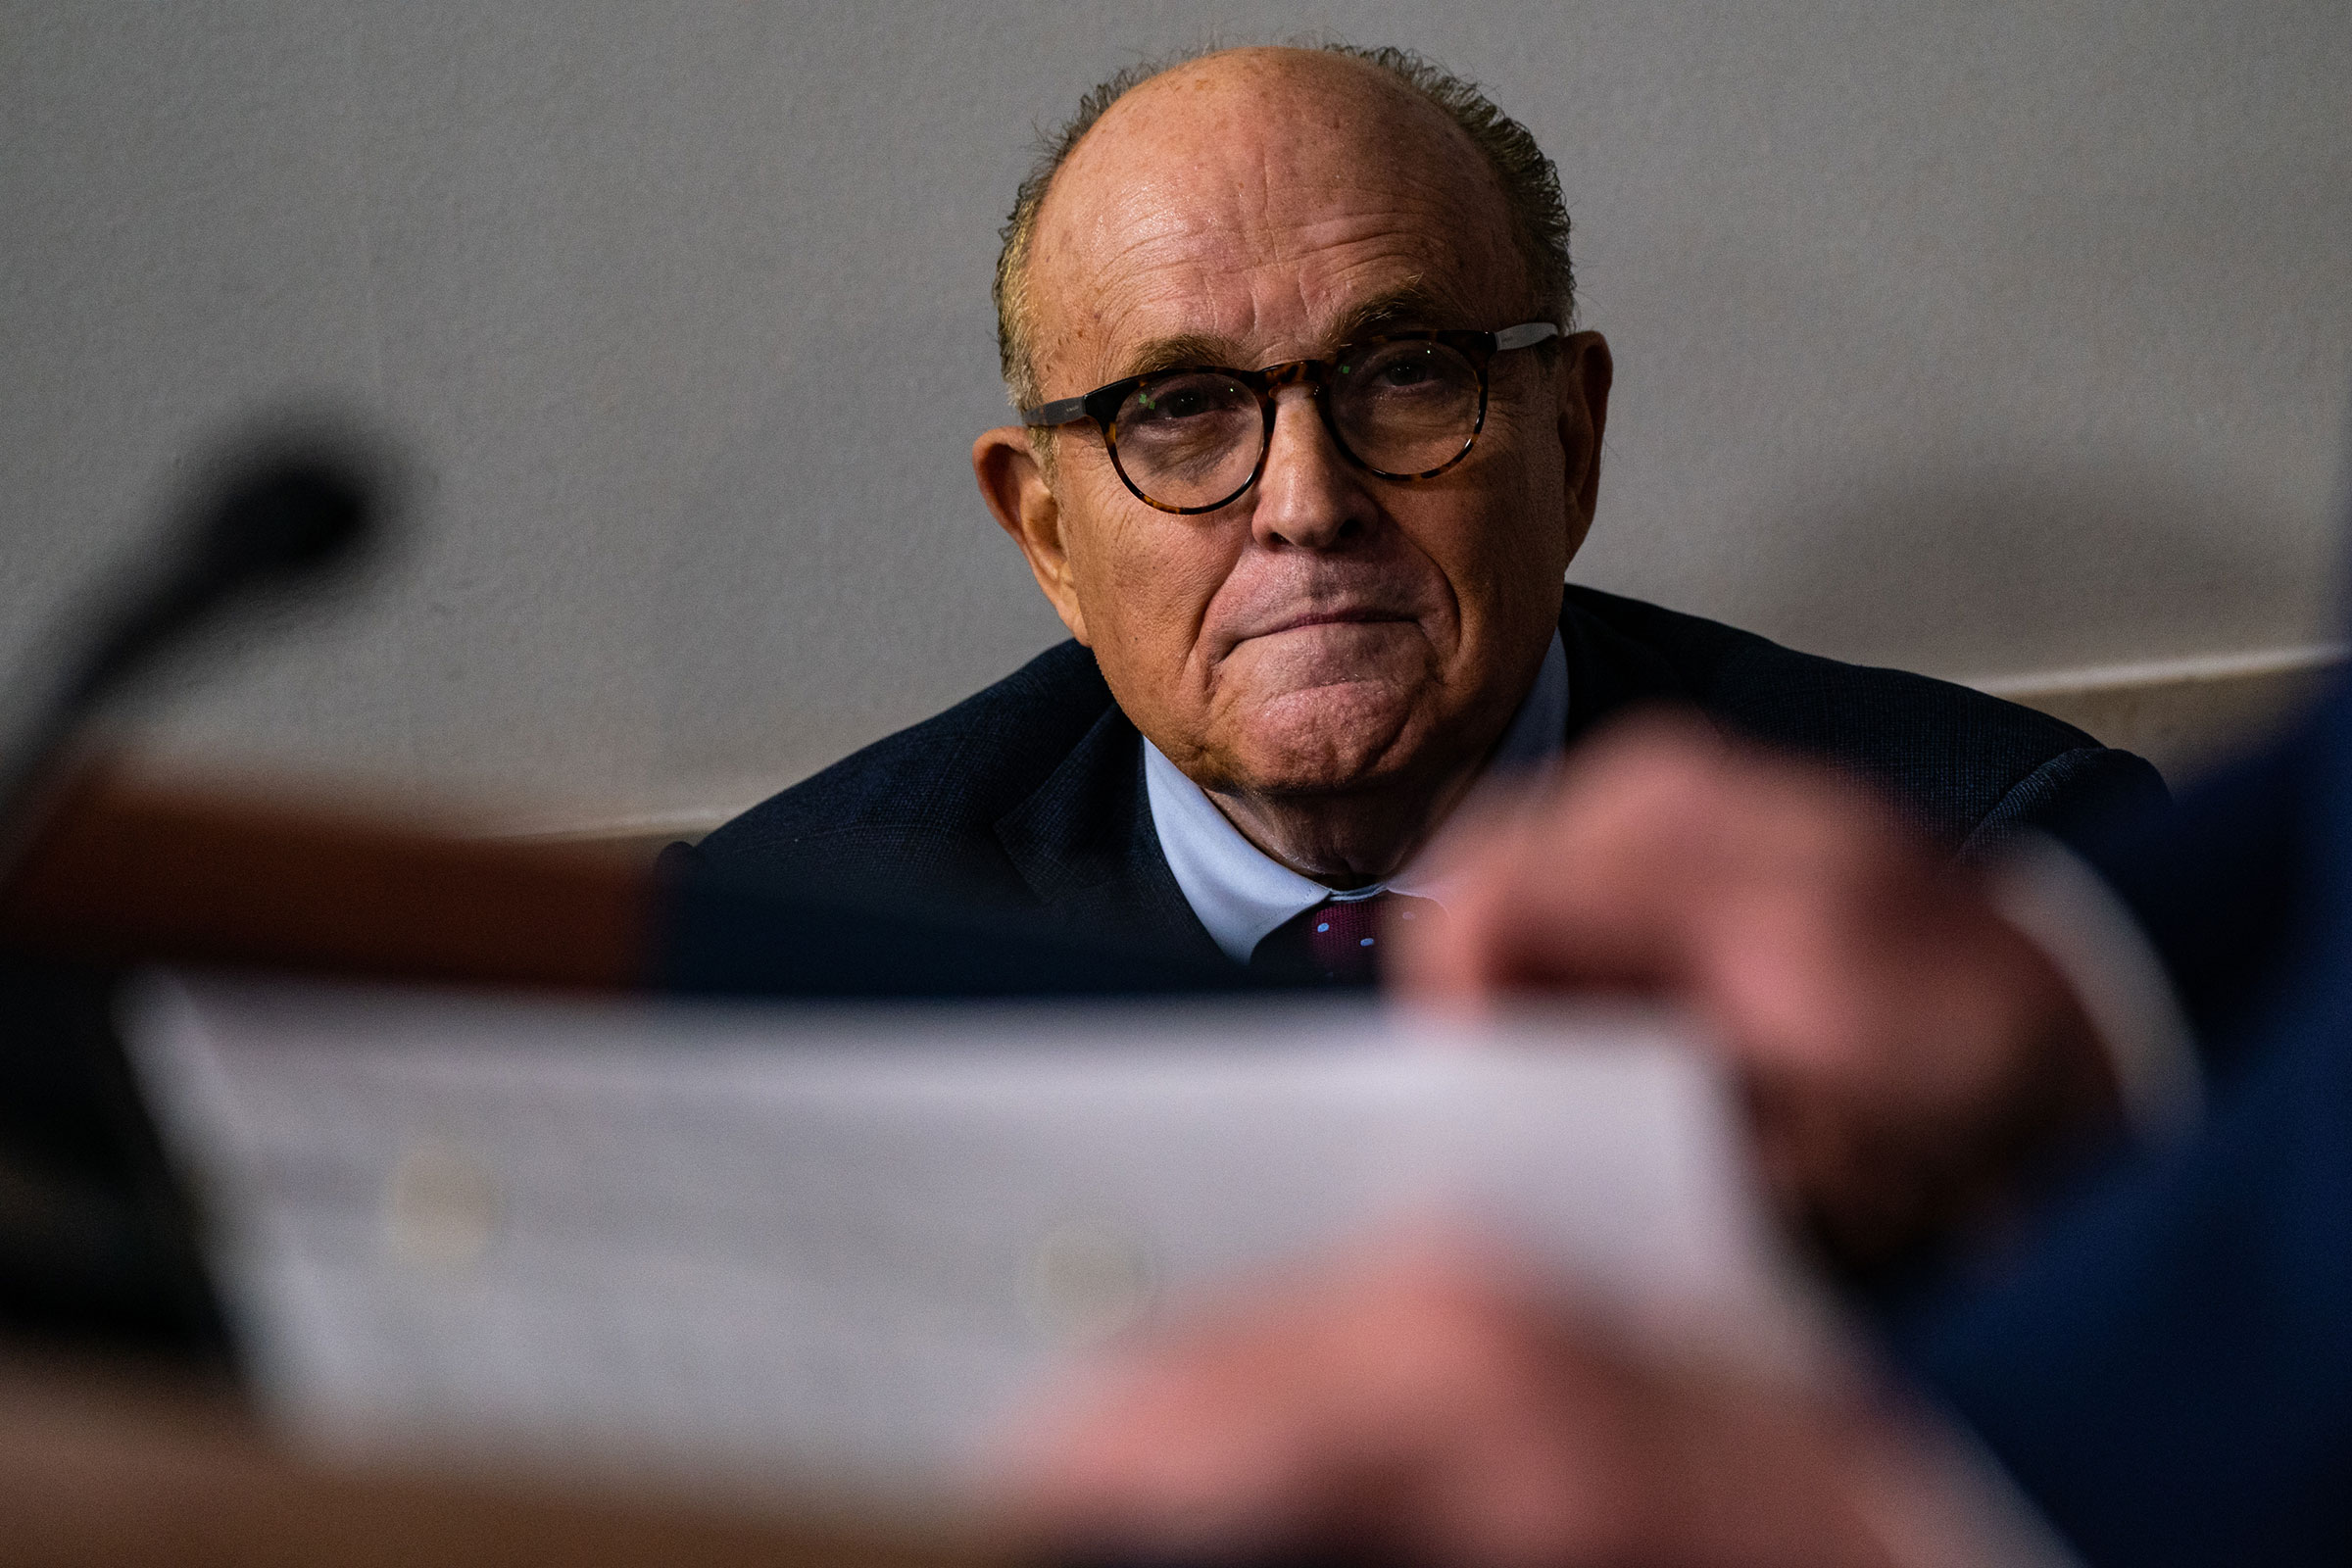 Rudy Giuliani listens as President Trump speaks during a news briefing at the White House in Washington, D.C., on Sept. 27, 2020. (Salwan Georges—The Washington Post/Getty Images)